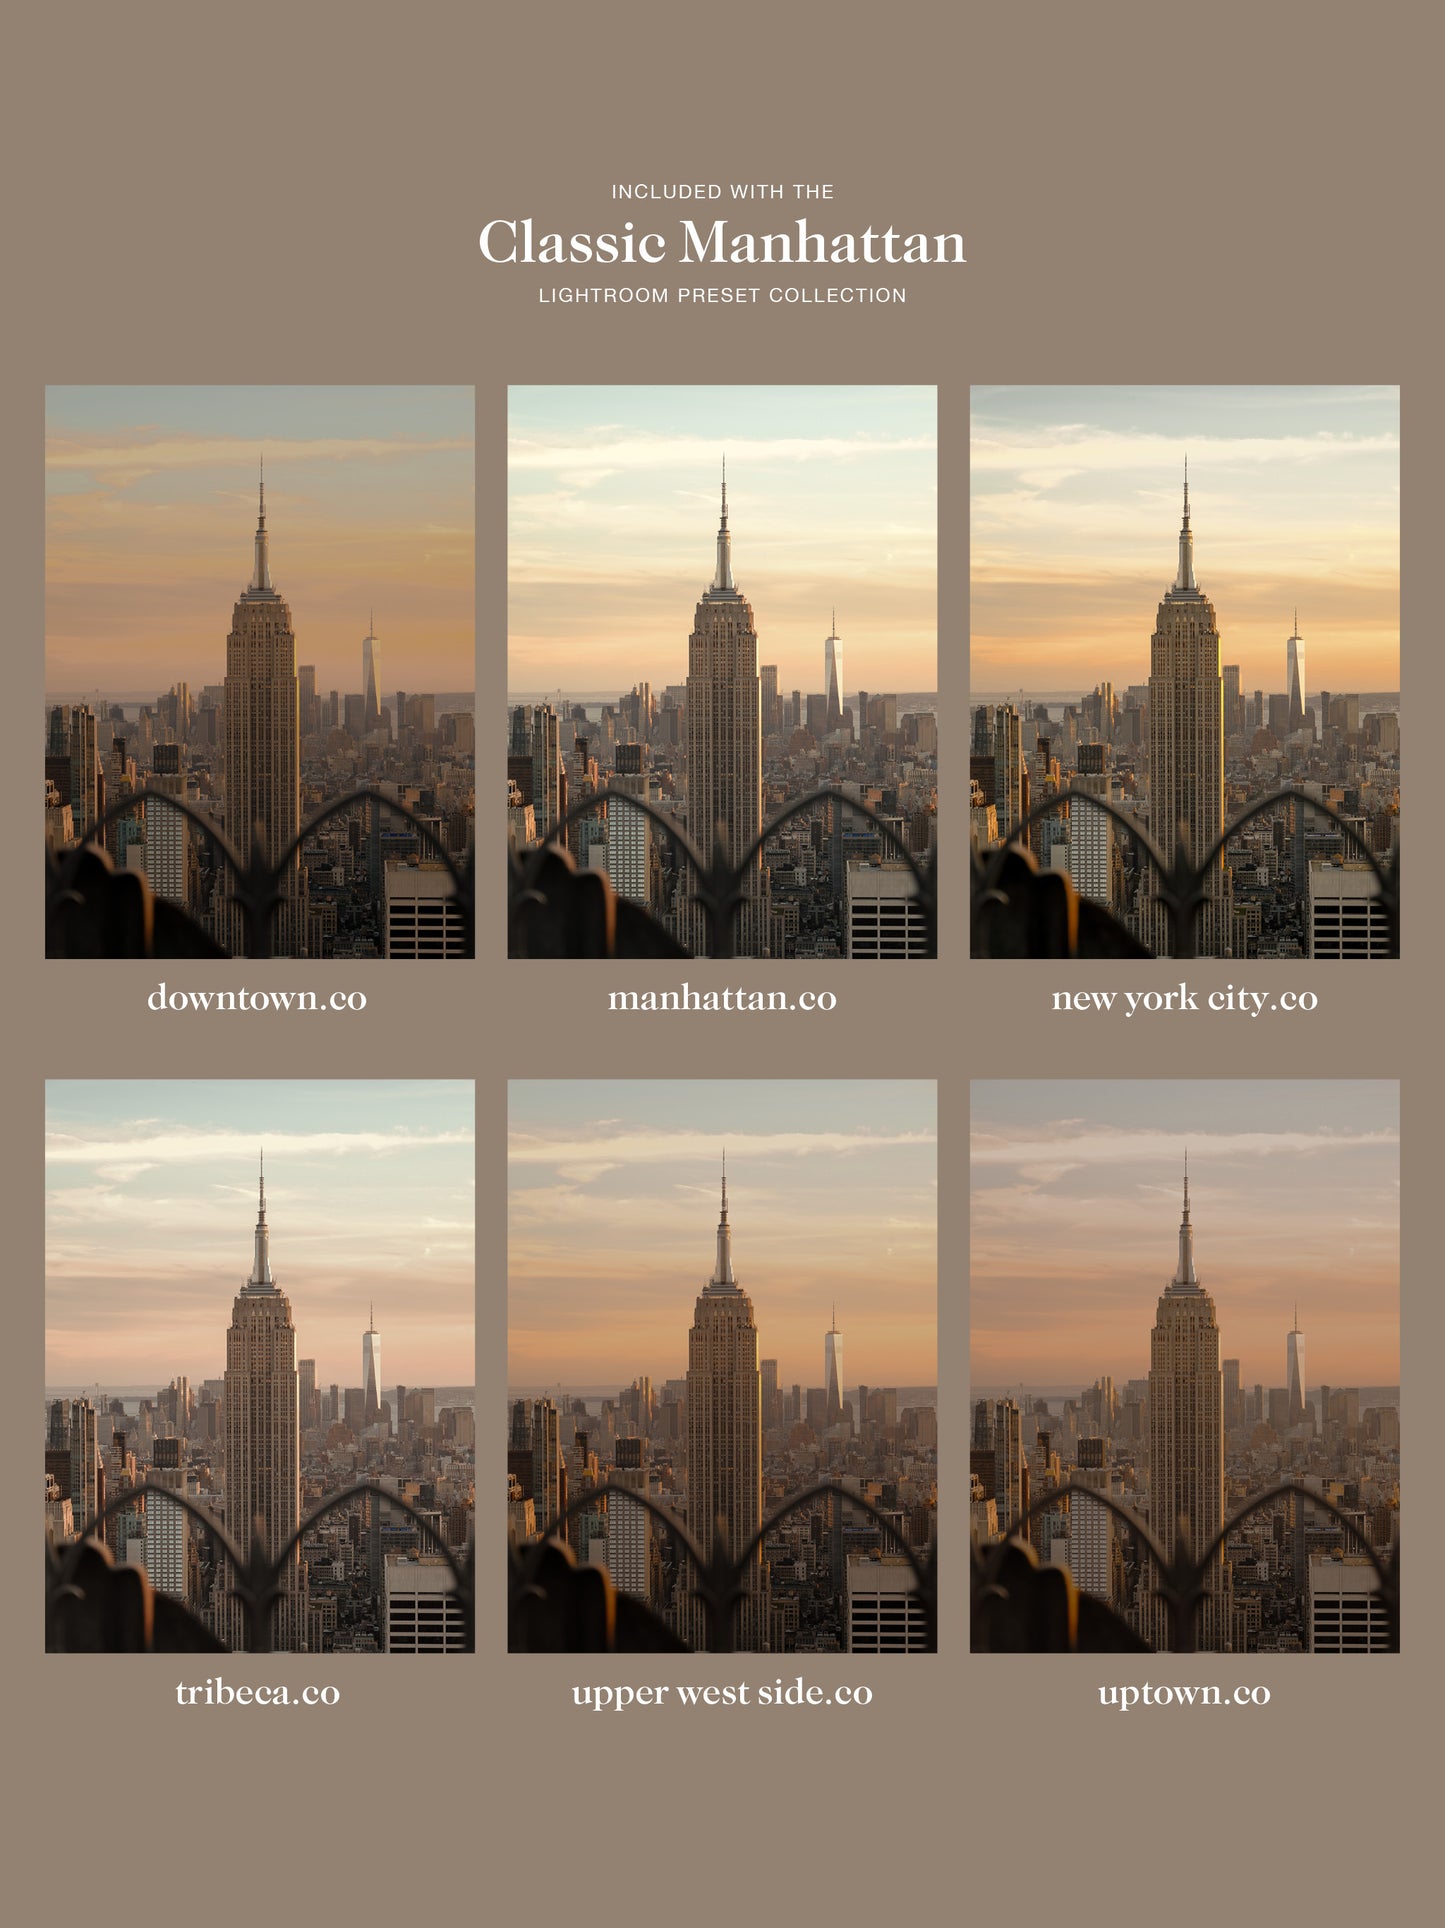 The Complete "Classic Manhattan" Lightroom Preset Collection